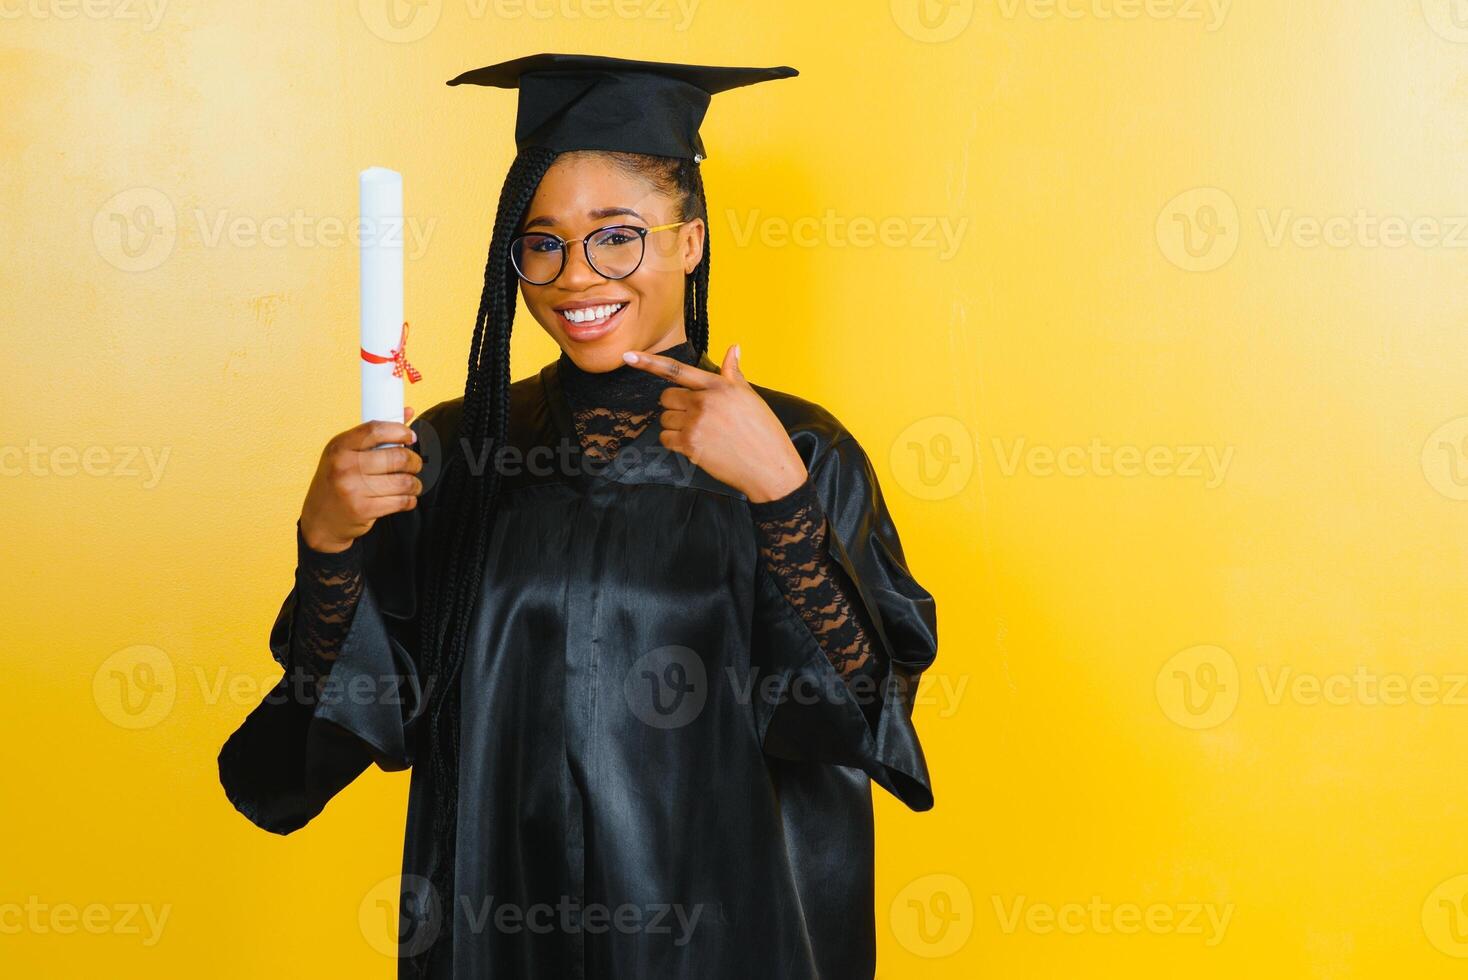 cheerful african american graduate student with diploma in her hand photo